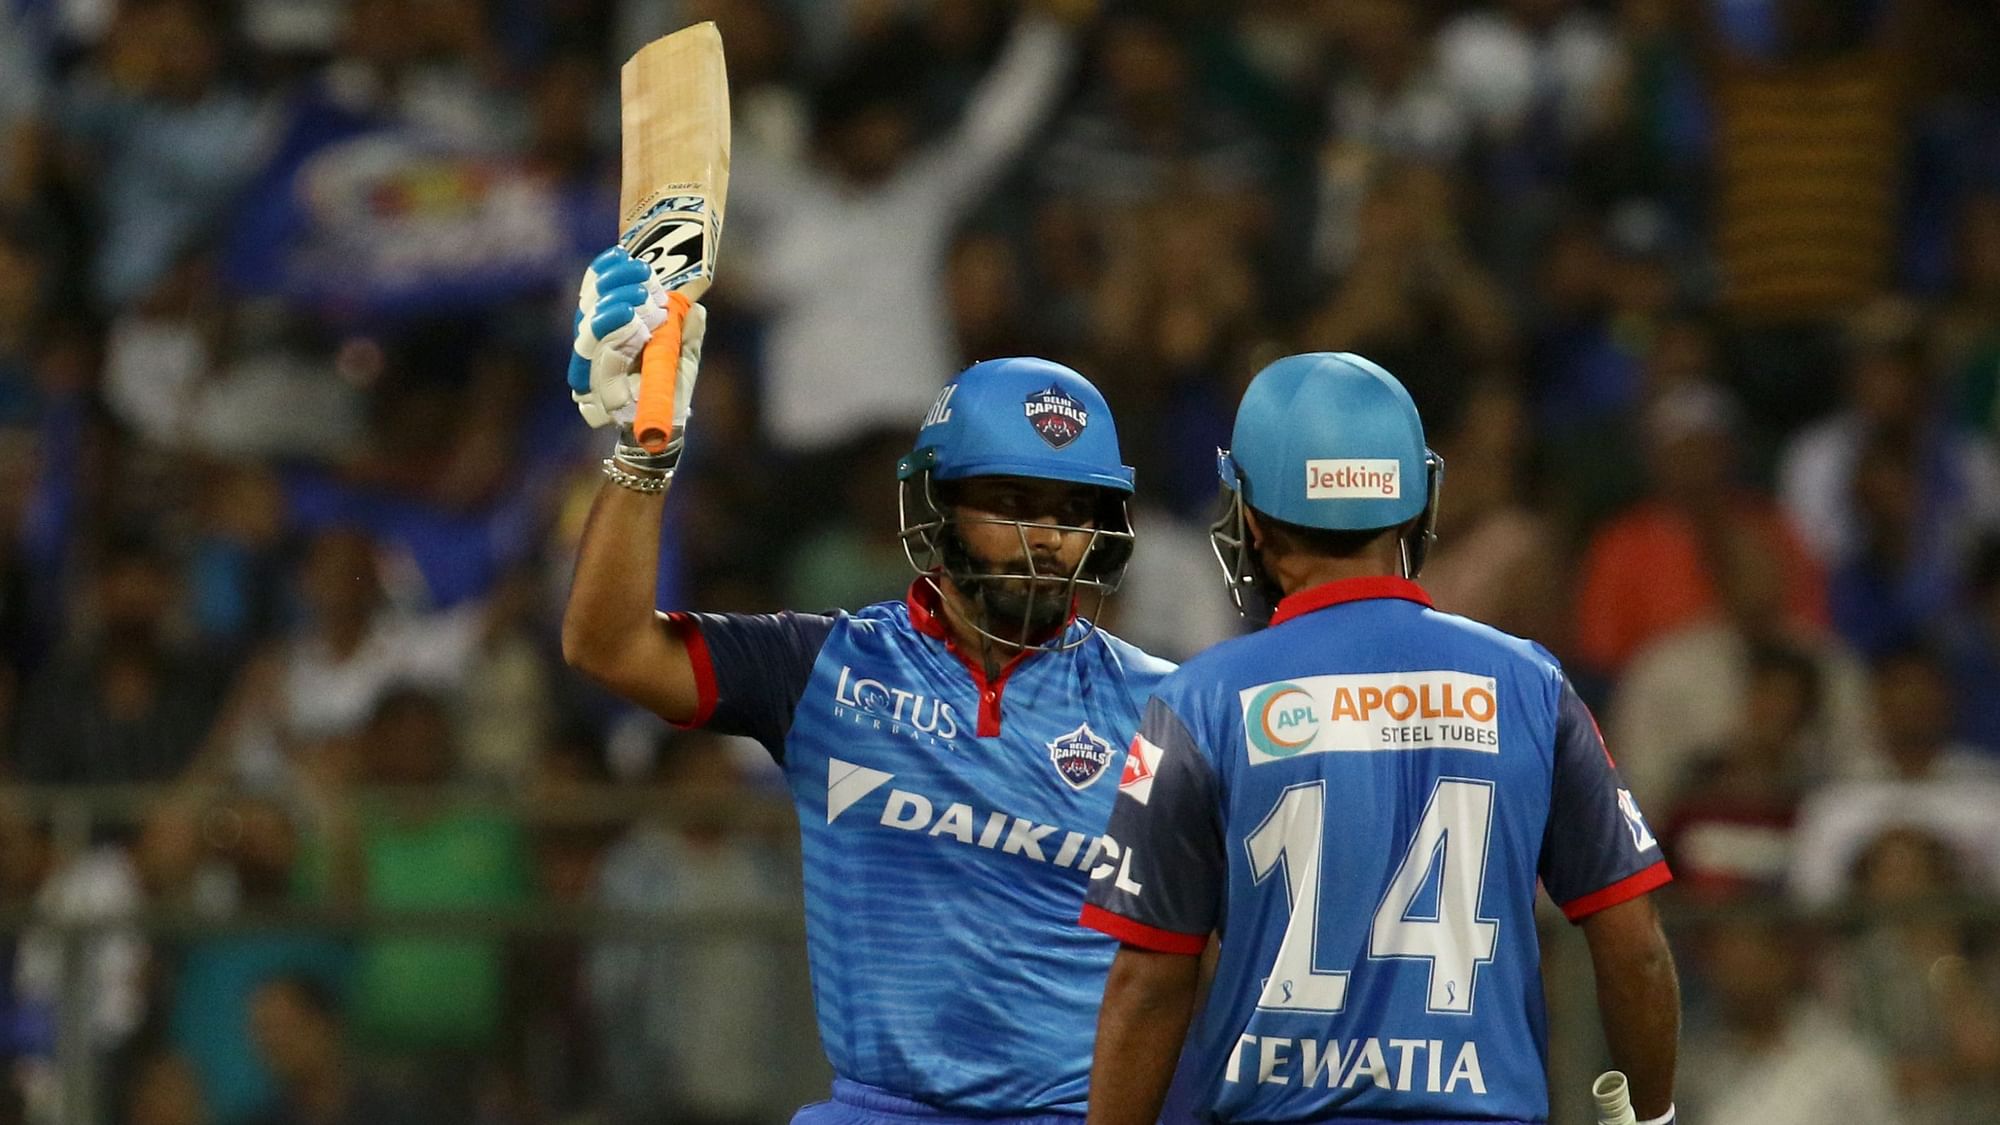 Rishabh Pant sent the ball to all parts of the ground as he took a special liking to premier Mumbai pacer Jasprit Bumrah.